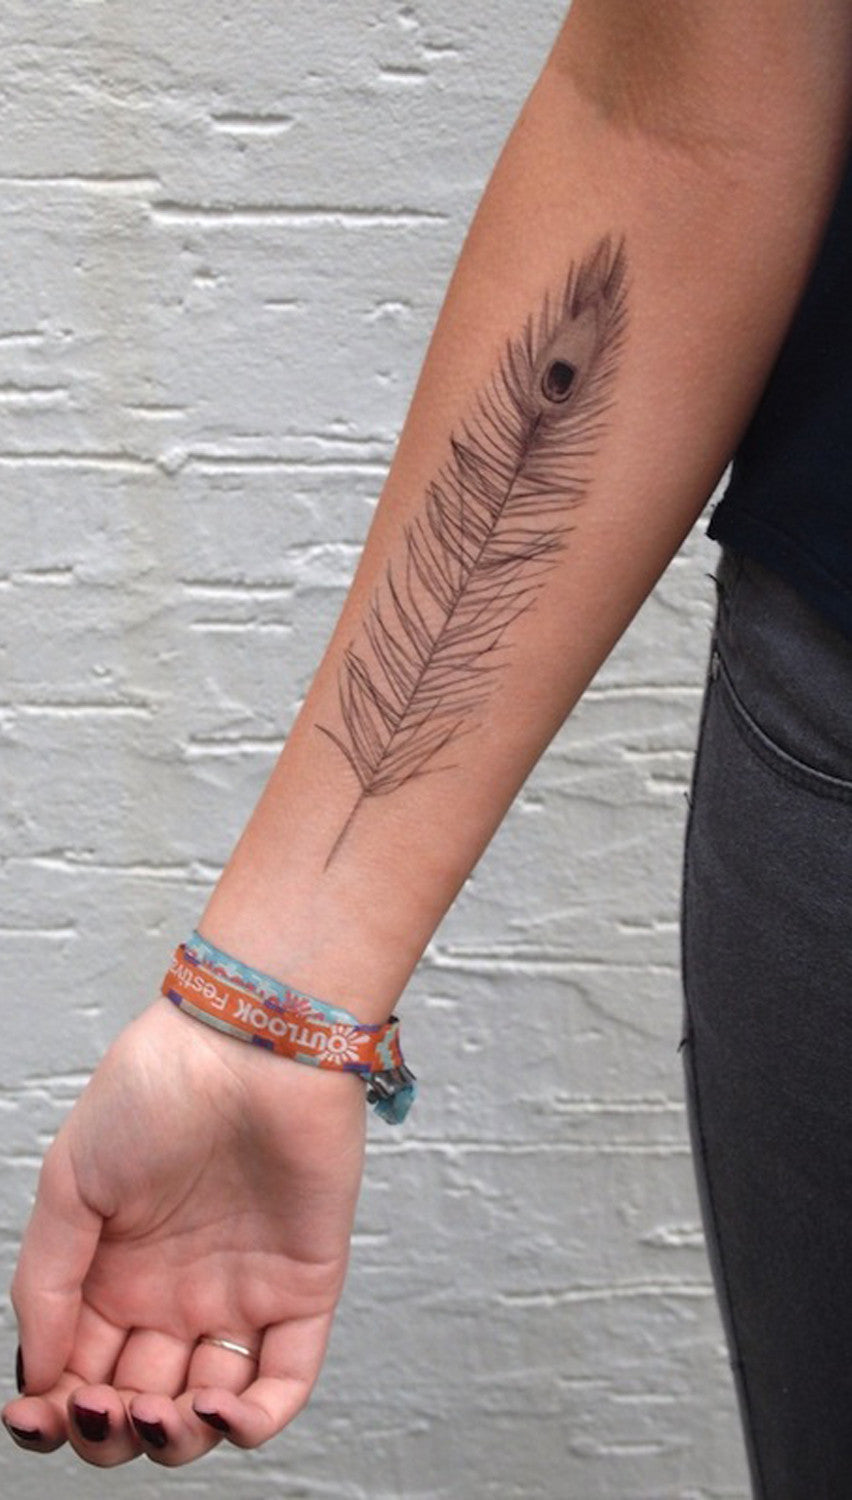 Realistic peacock feather tattoos that will blow your mind